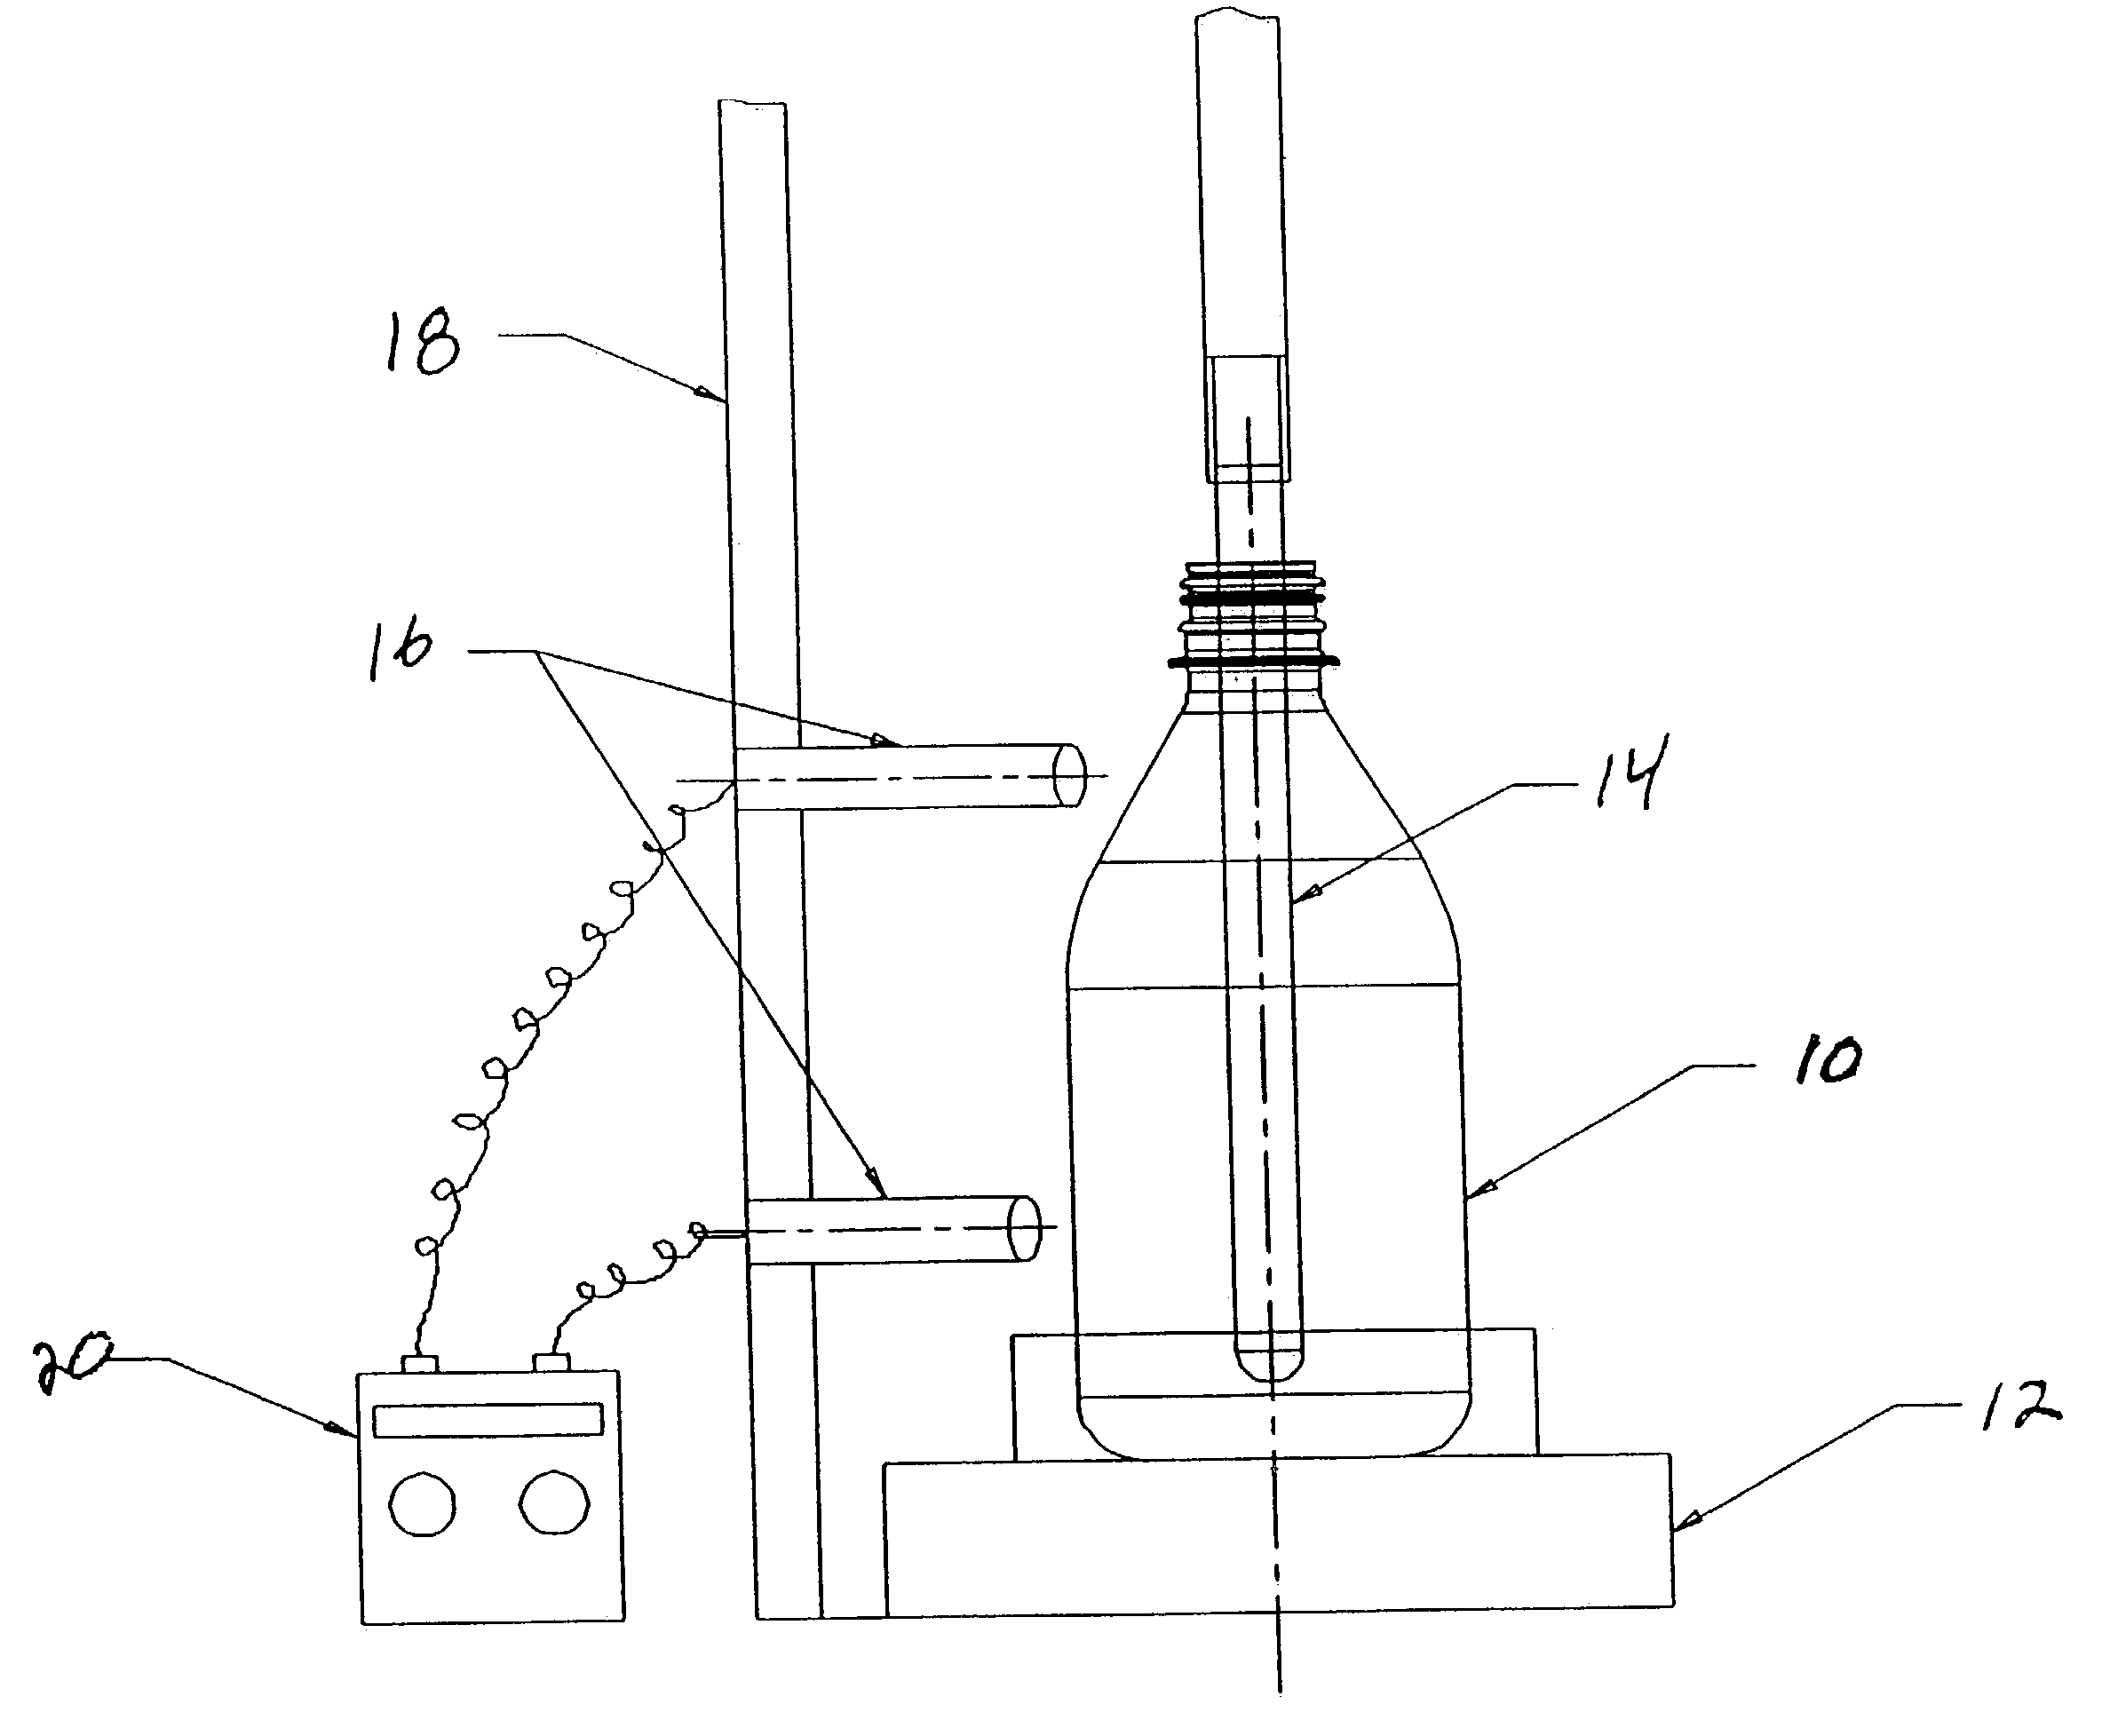 Process and apparatus for testing bottles